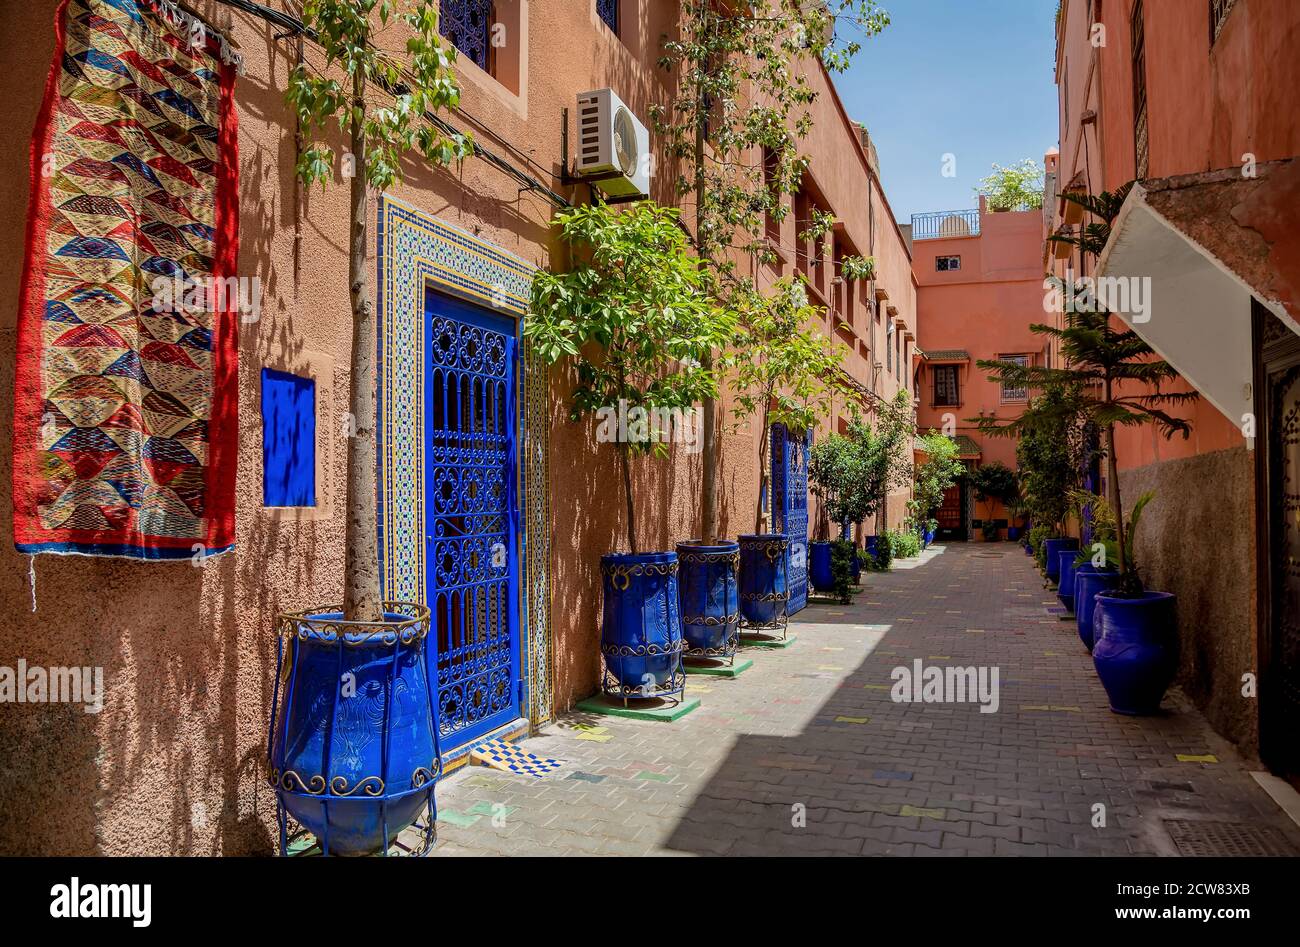 Typical narrow street in Marrakesh with carpet, bright blue ceramic flower pots, blue painted doors, red whitewashed wall. Stock Photo